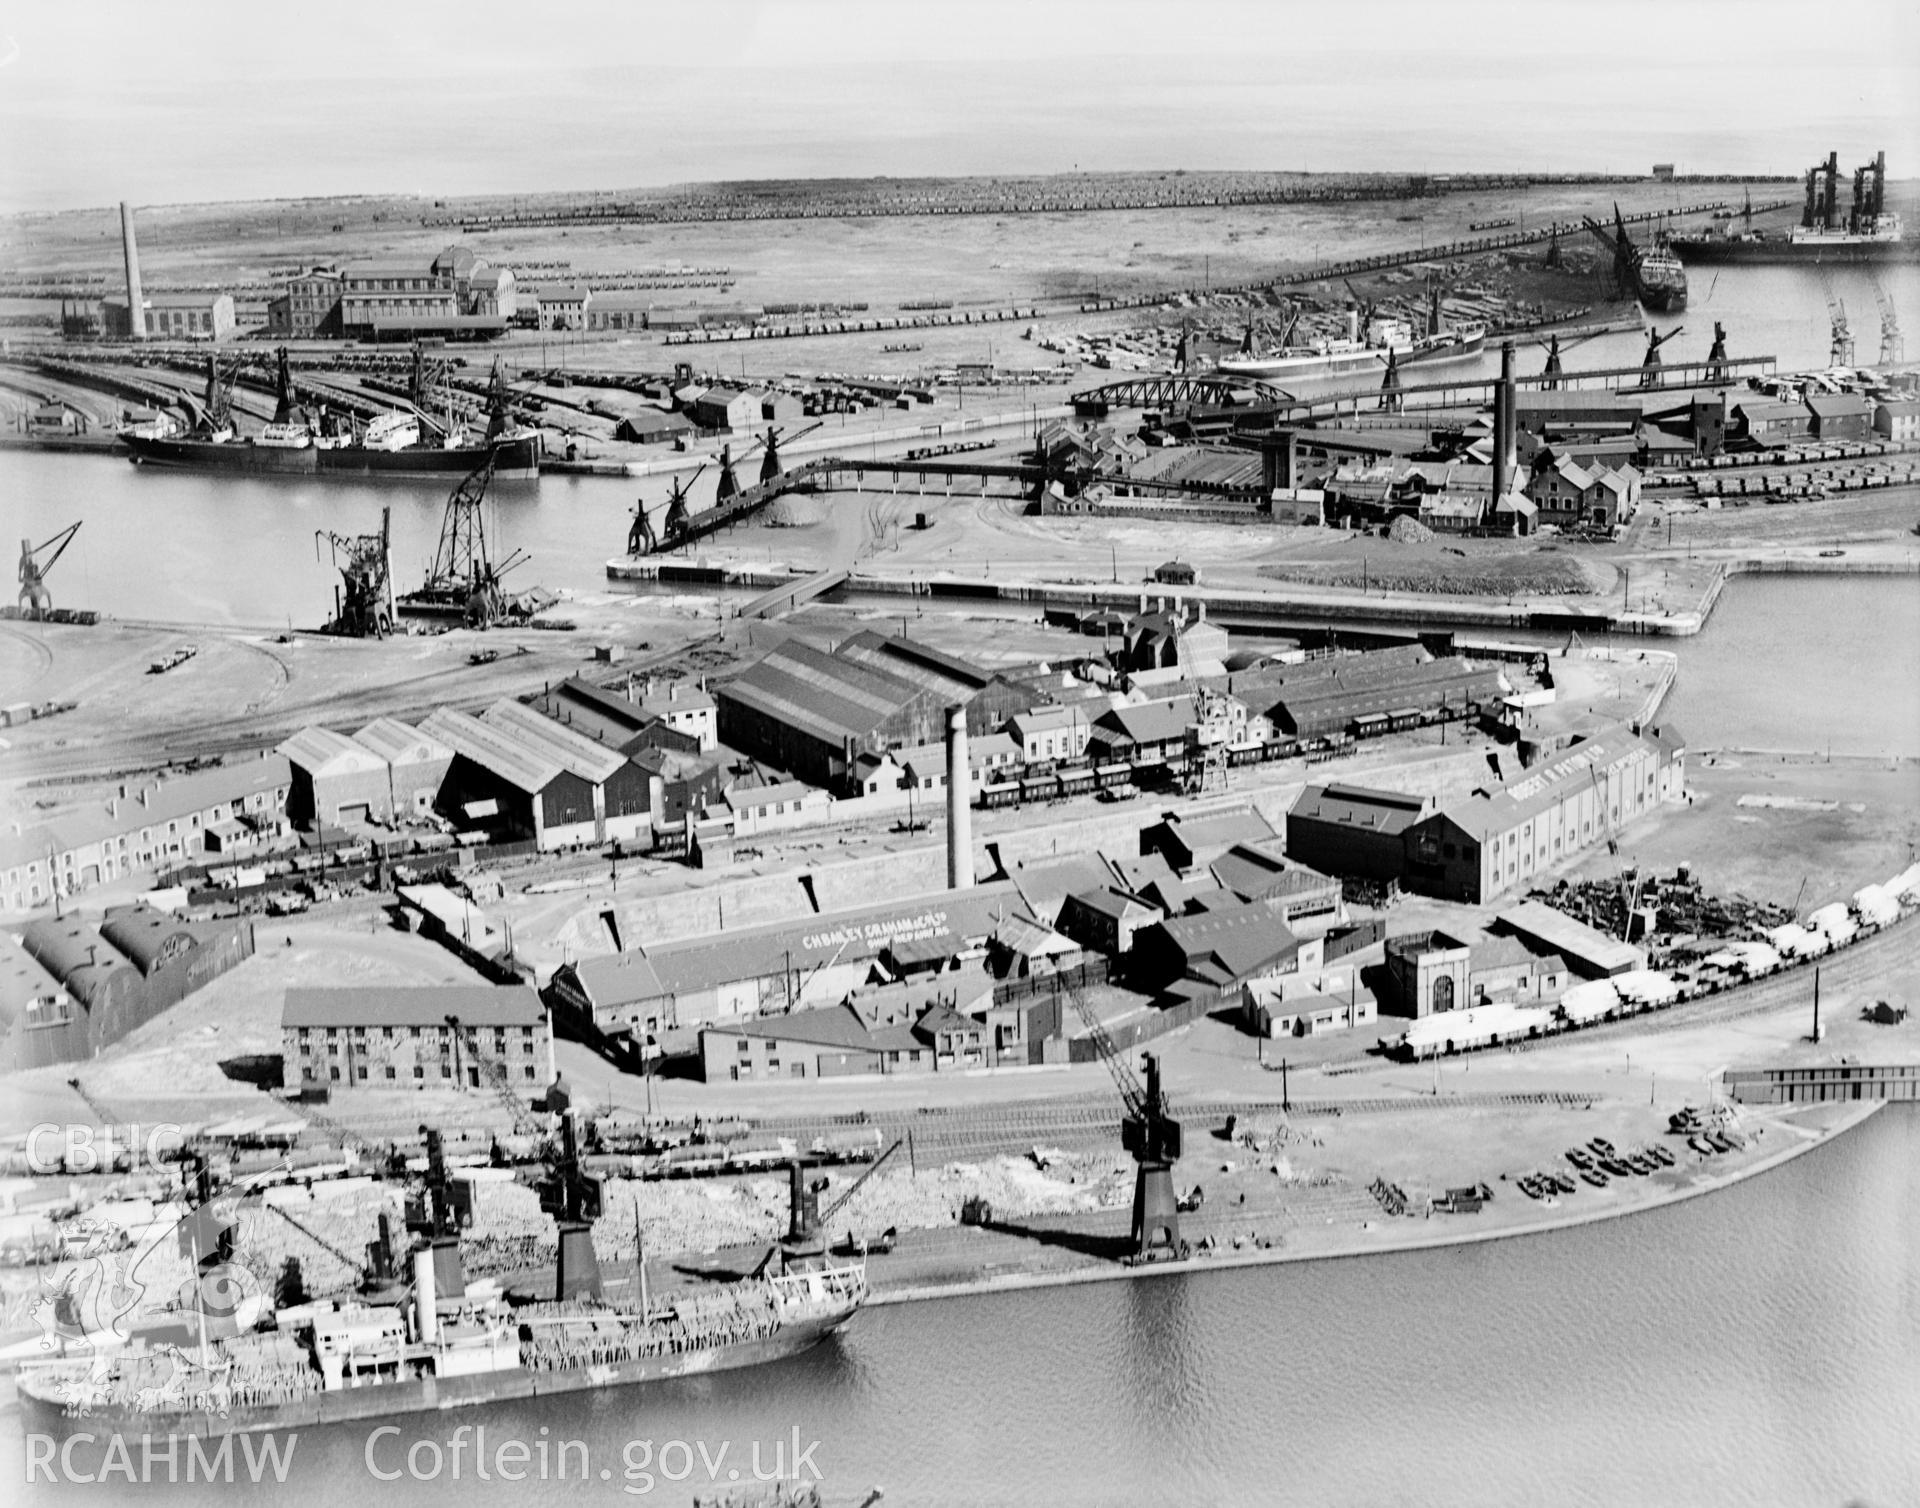 View of C.H. Bailey Ltd., dry dock owners & ship repairers and surrounding dockyard, Cardiff, oblique aerial view. 5?x4? black and white glass plate negative.